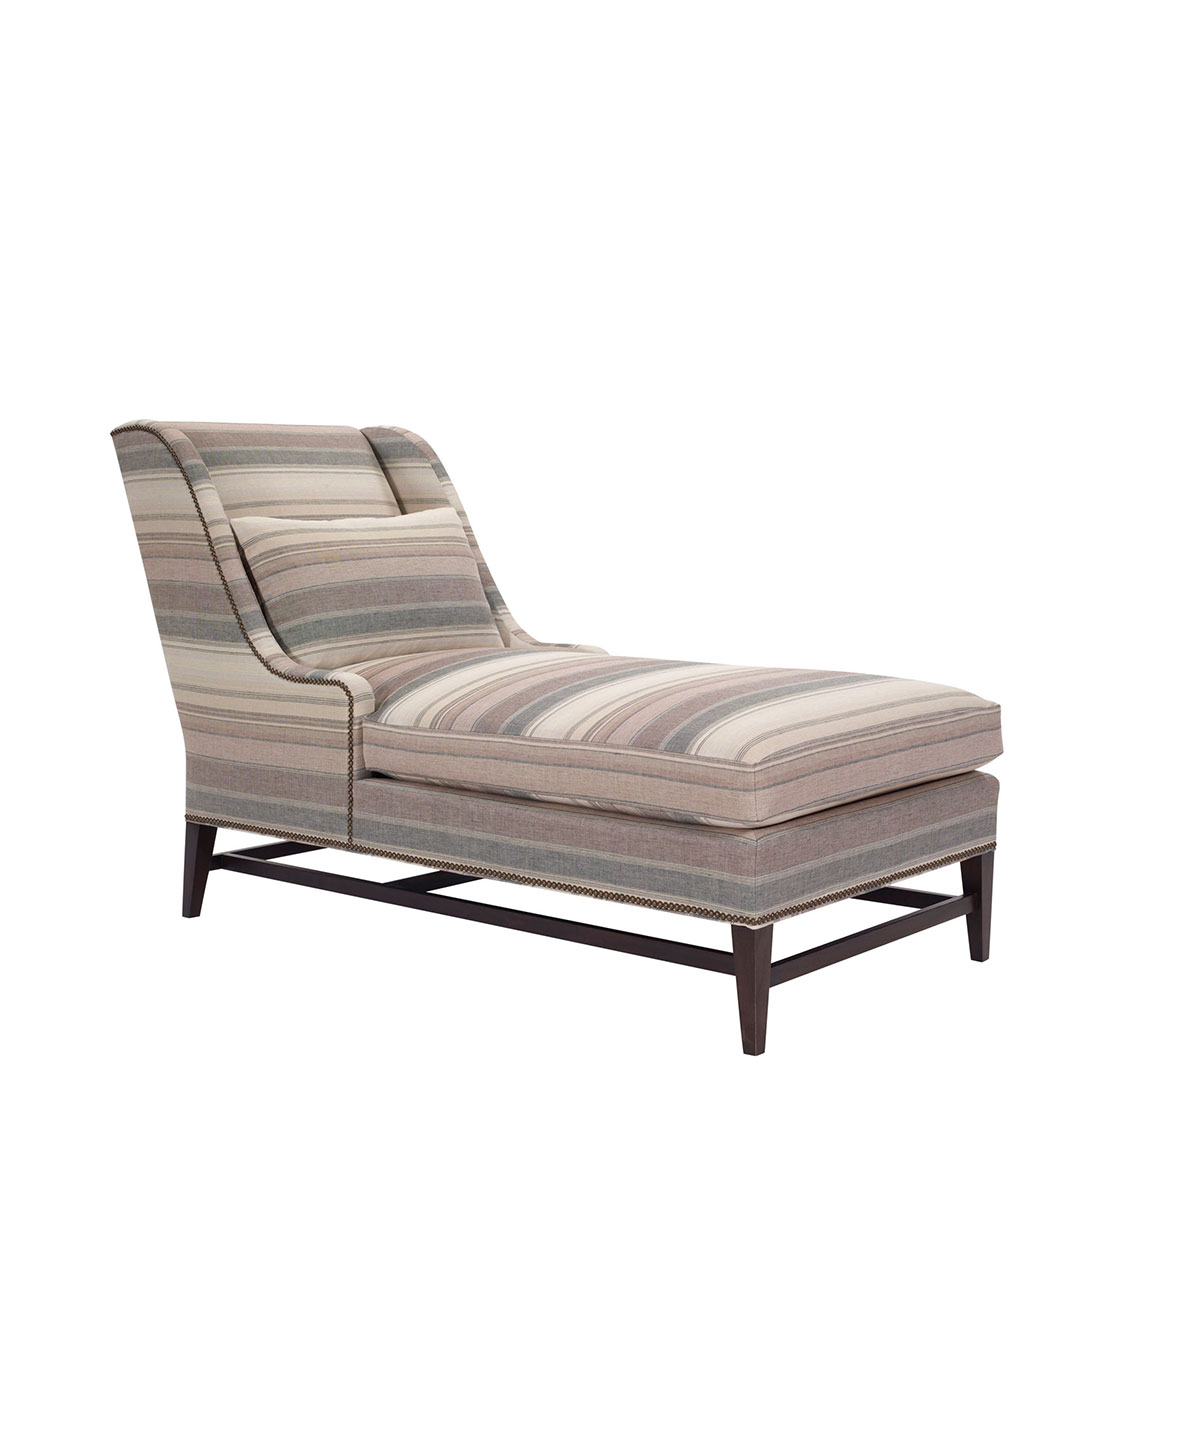 Solenne Chaise